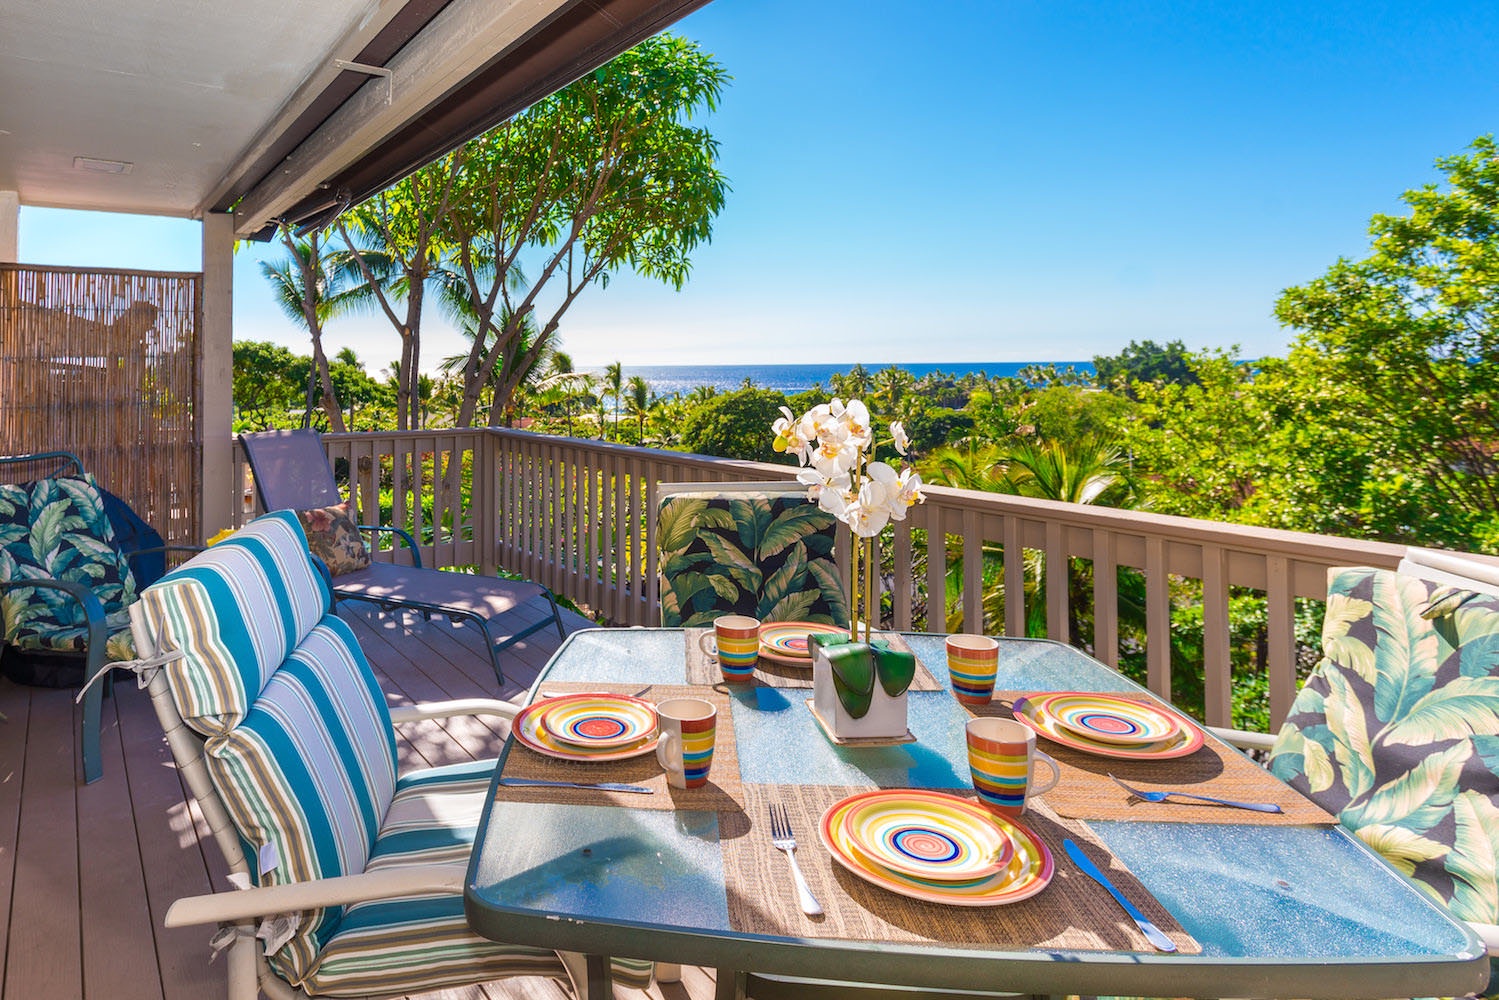 Enjoy quiet outdoor dining with partial ocean views on your private lanai